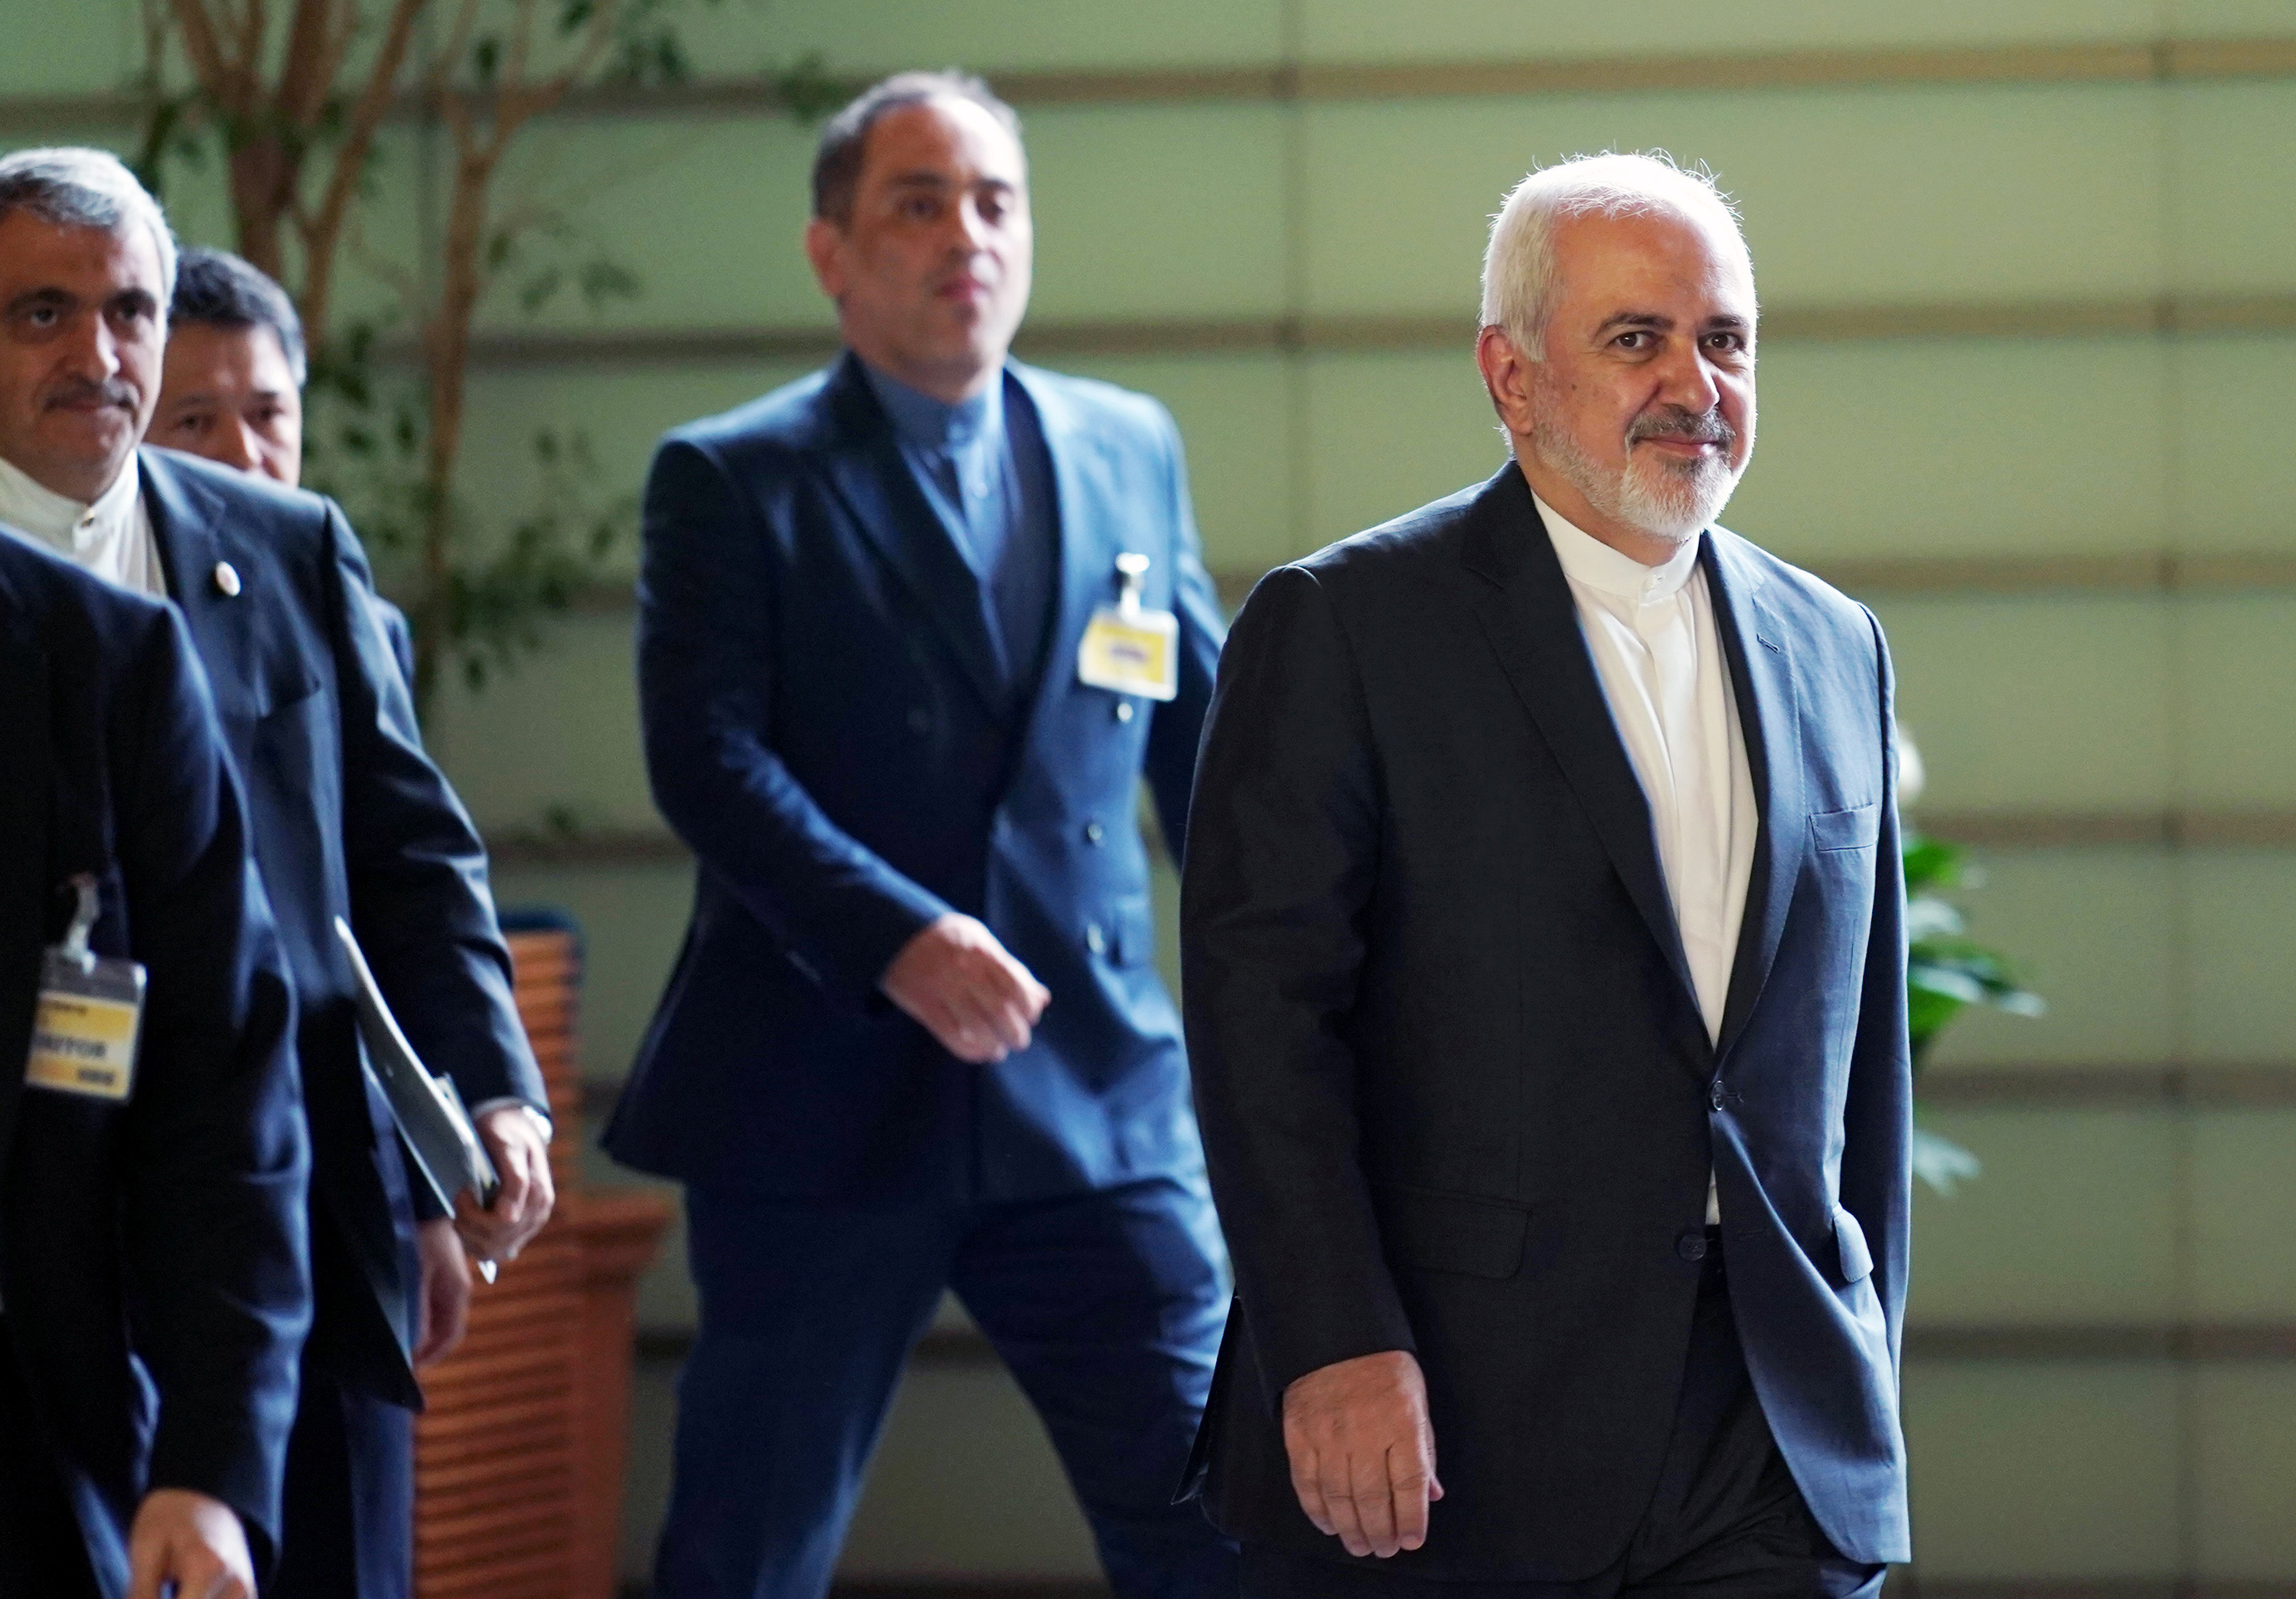 Iranian Foreign Minister Mohammad Javad Zarif, right, walks to meet Japanese Prime Minister Shinzo Abe at Abe's official residence in Tokyo Thursday, May 16, 2019.